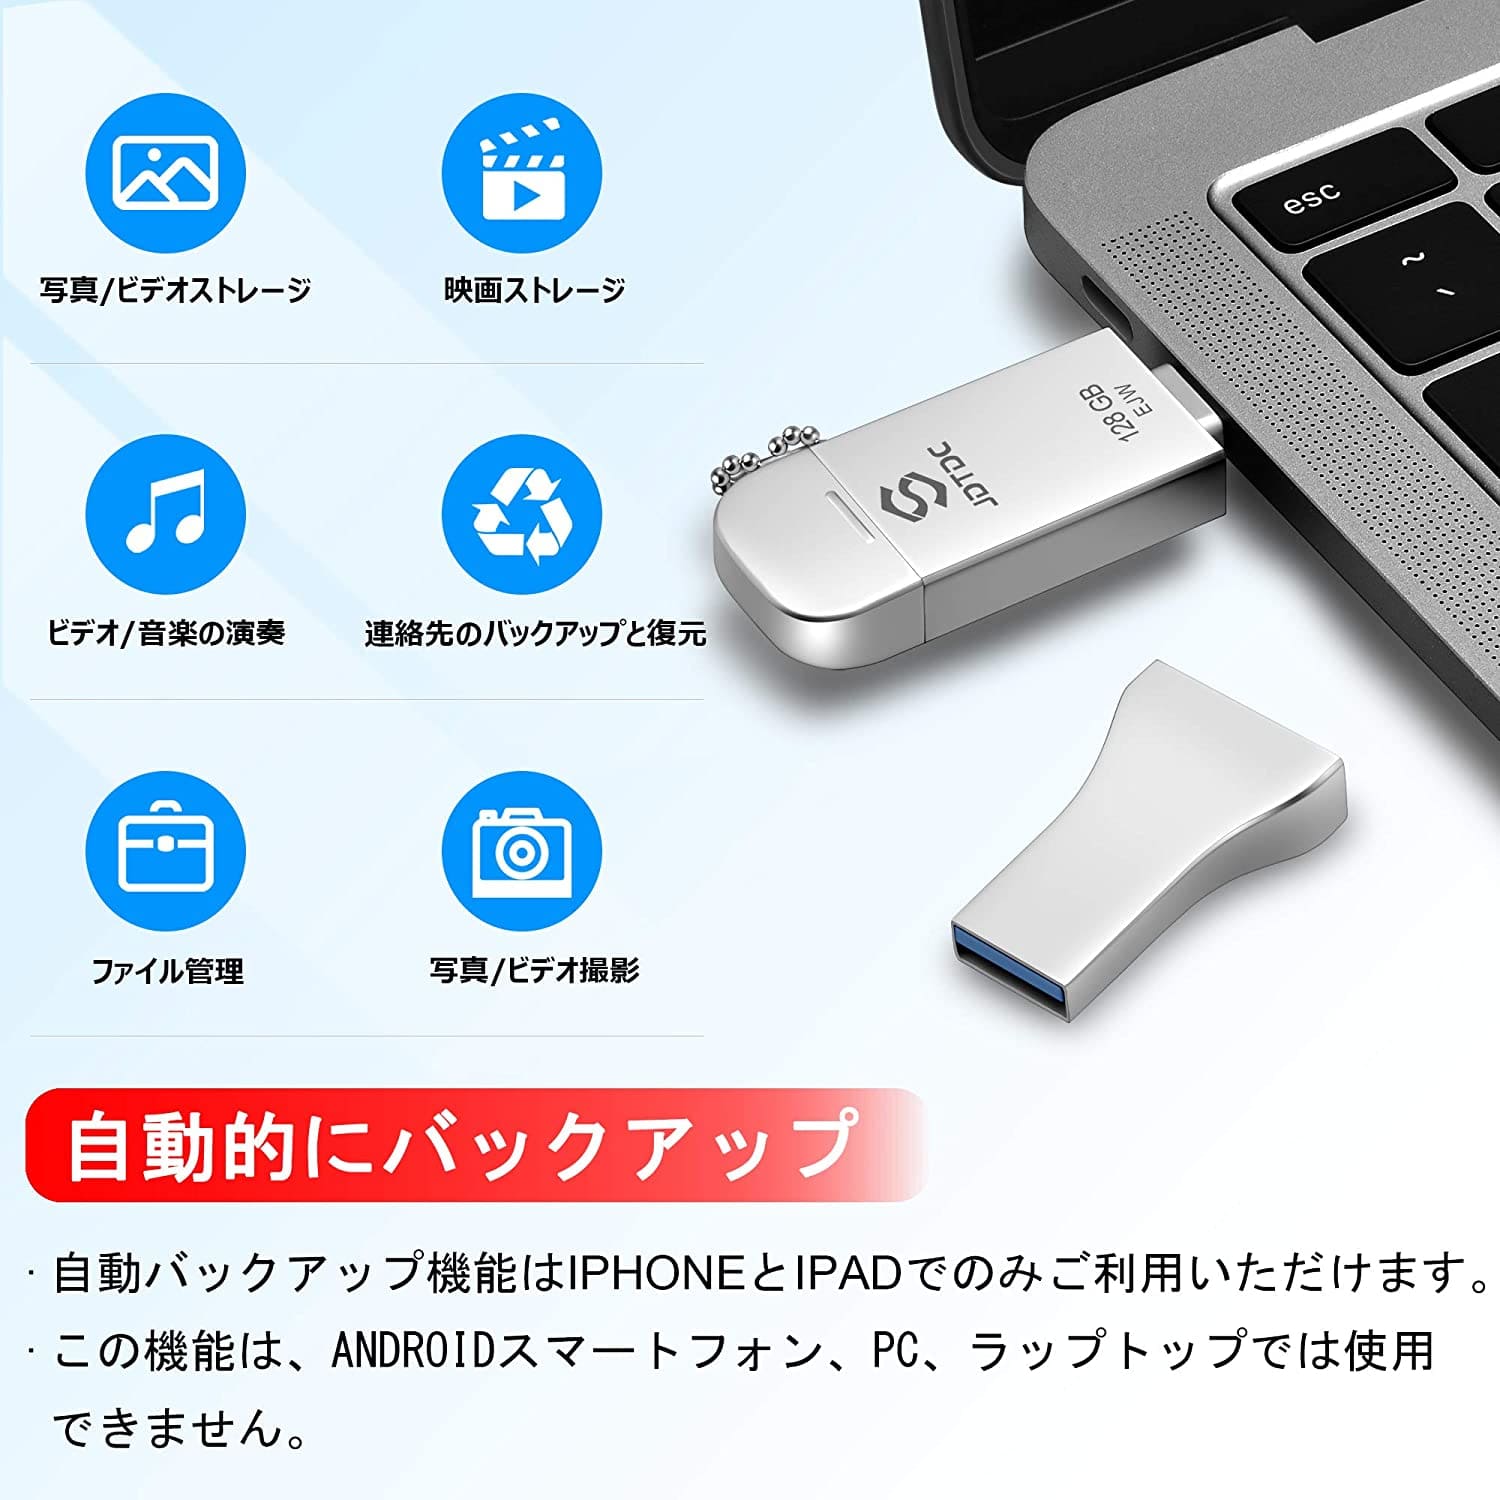 New]Backup iOS Android PC Lightning Flash drive connector photo stick  photograph USB memory Android (OTG/Type-C) PC for USB memory 128GB MFi  certification 2021 latest 3 in1 Flash drive memory iPad - BE